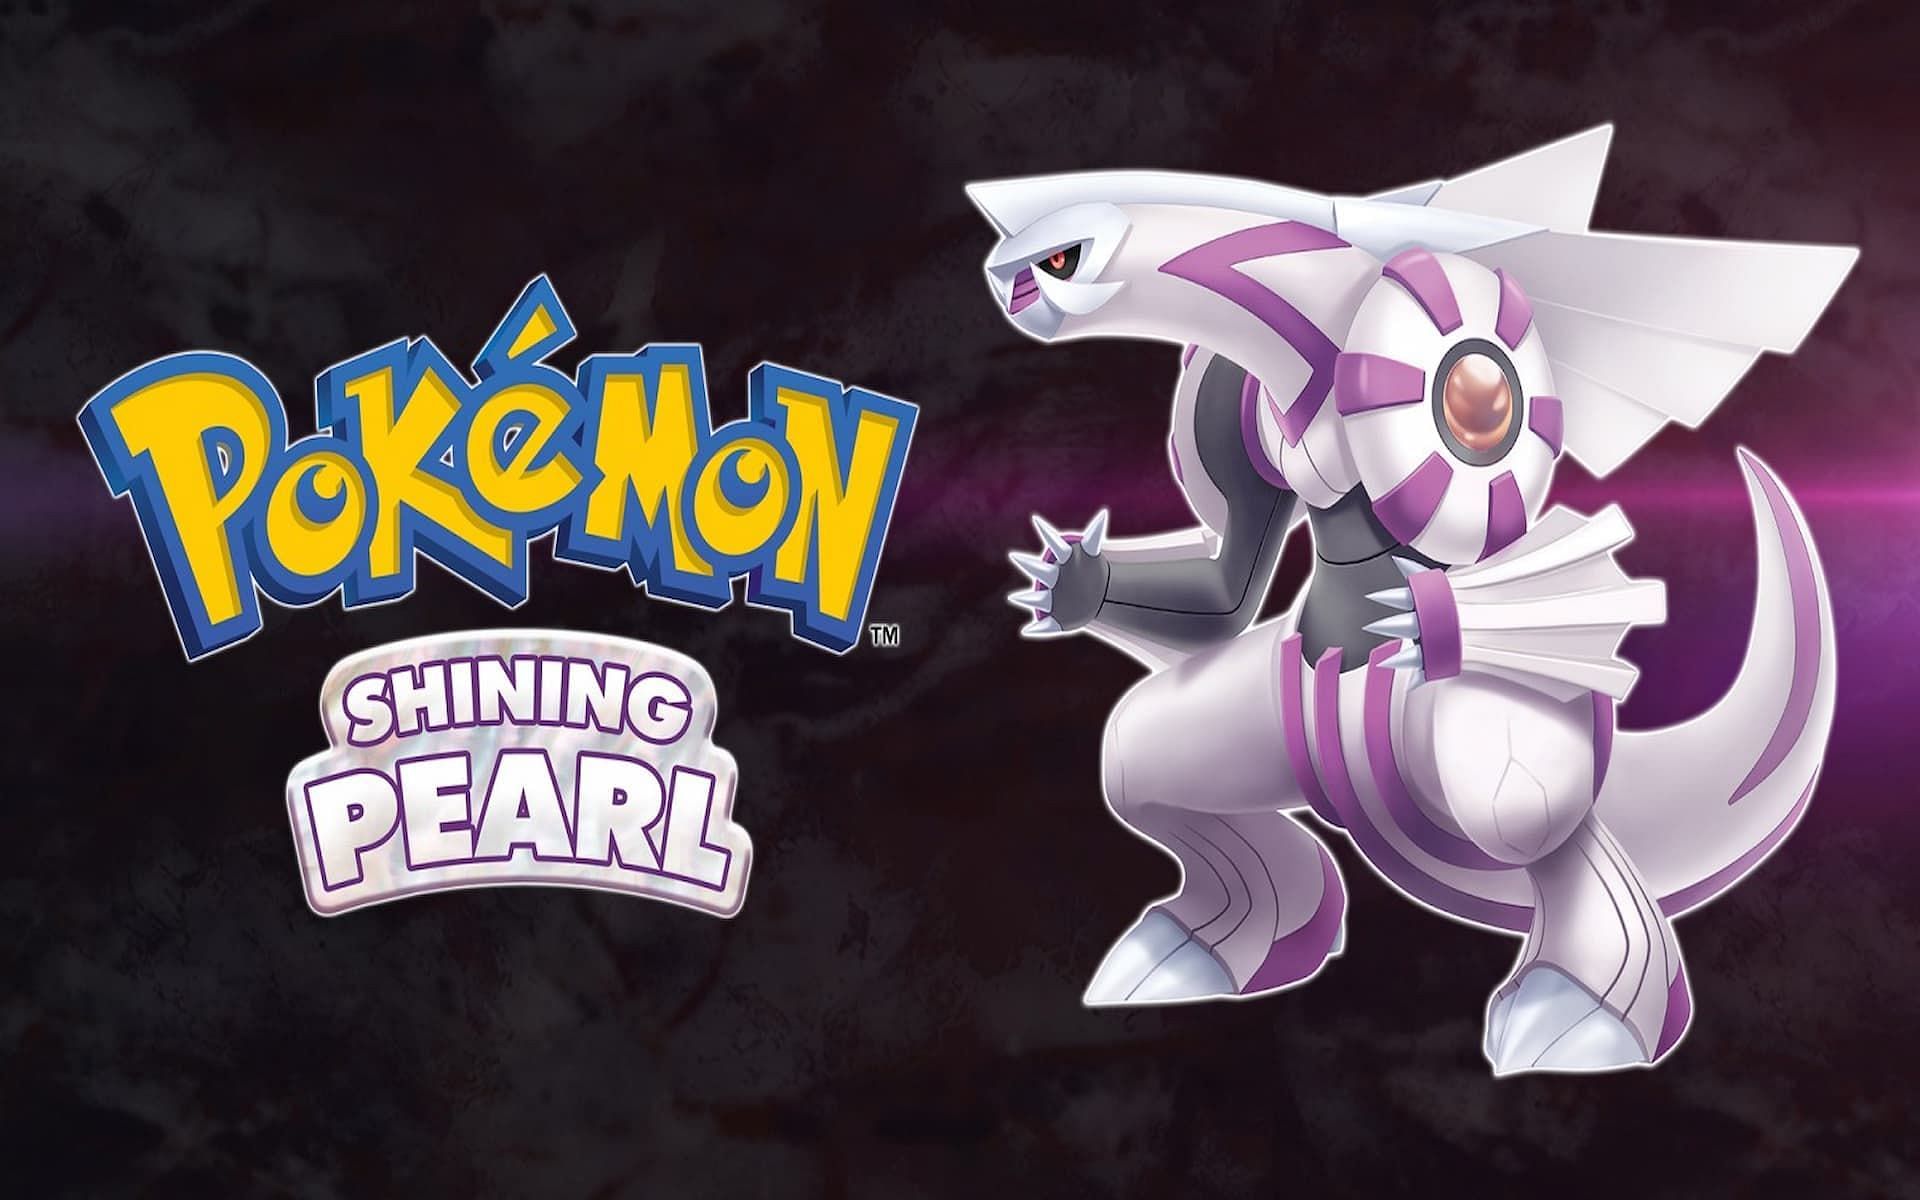 Every Version Exclusive Pokemon In Shining Pearl